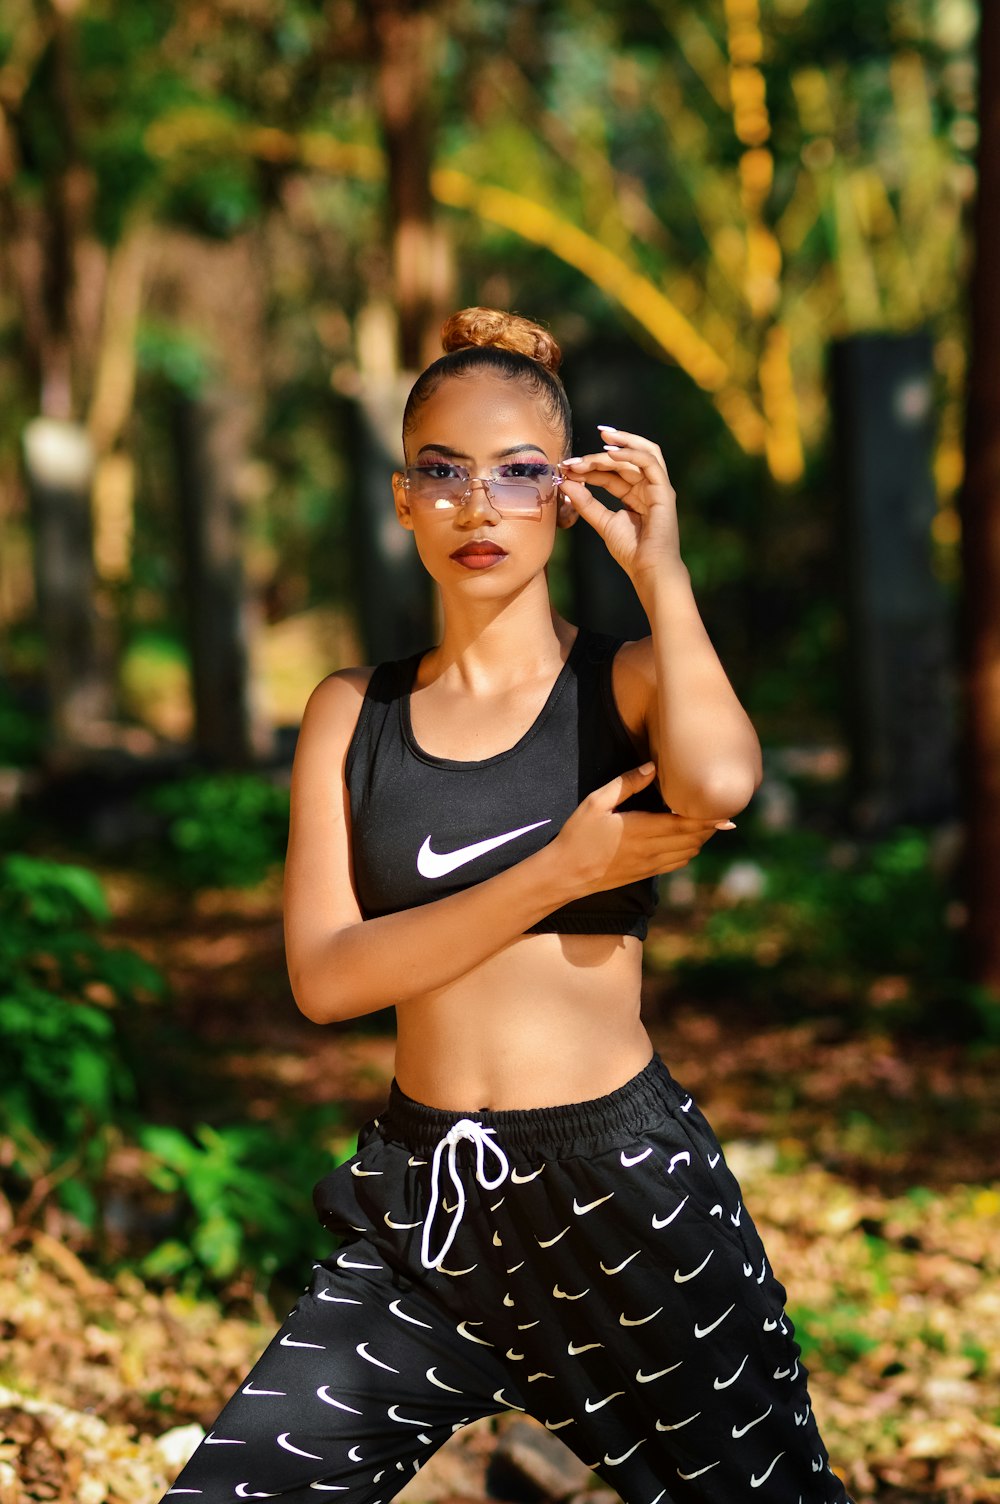 Nike Clothing Pictures | Download Free Images on Unsplash